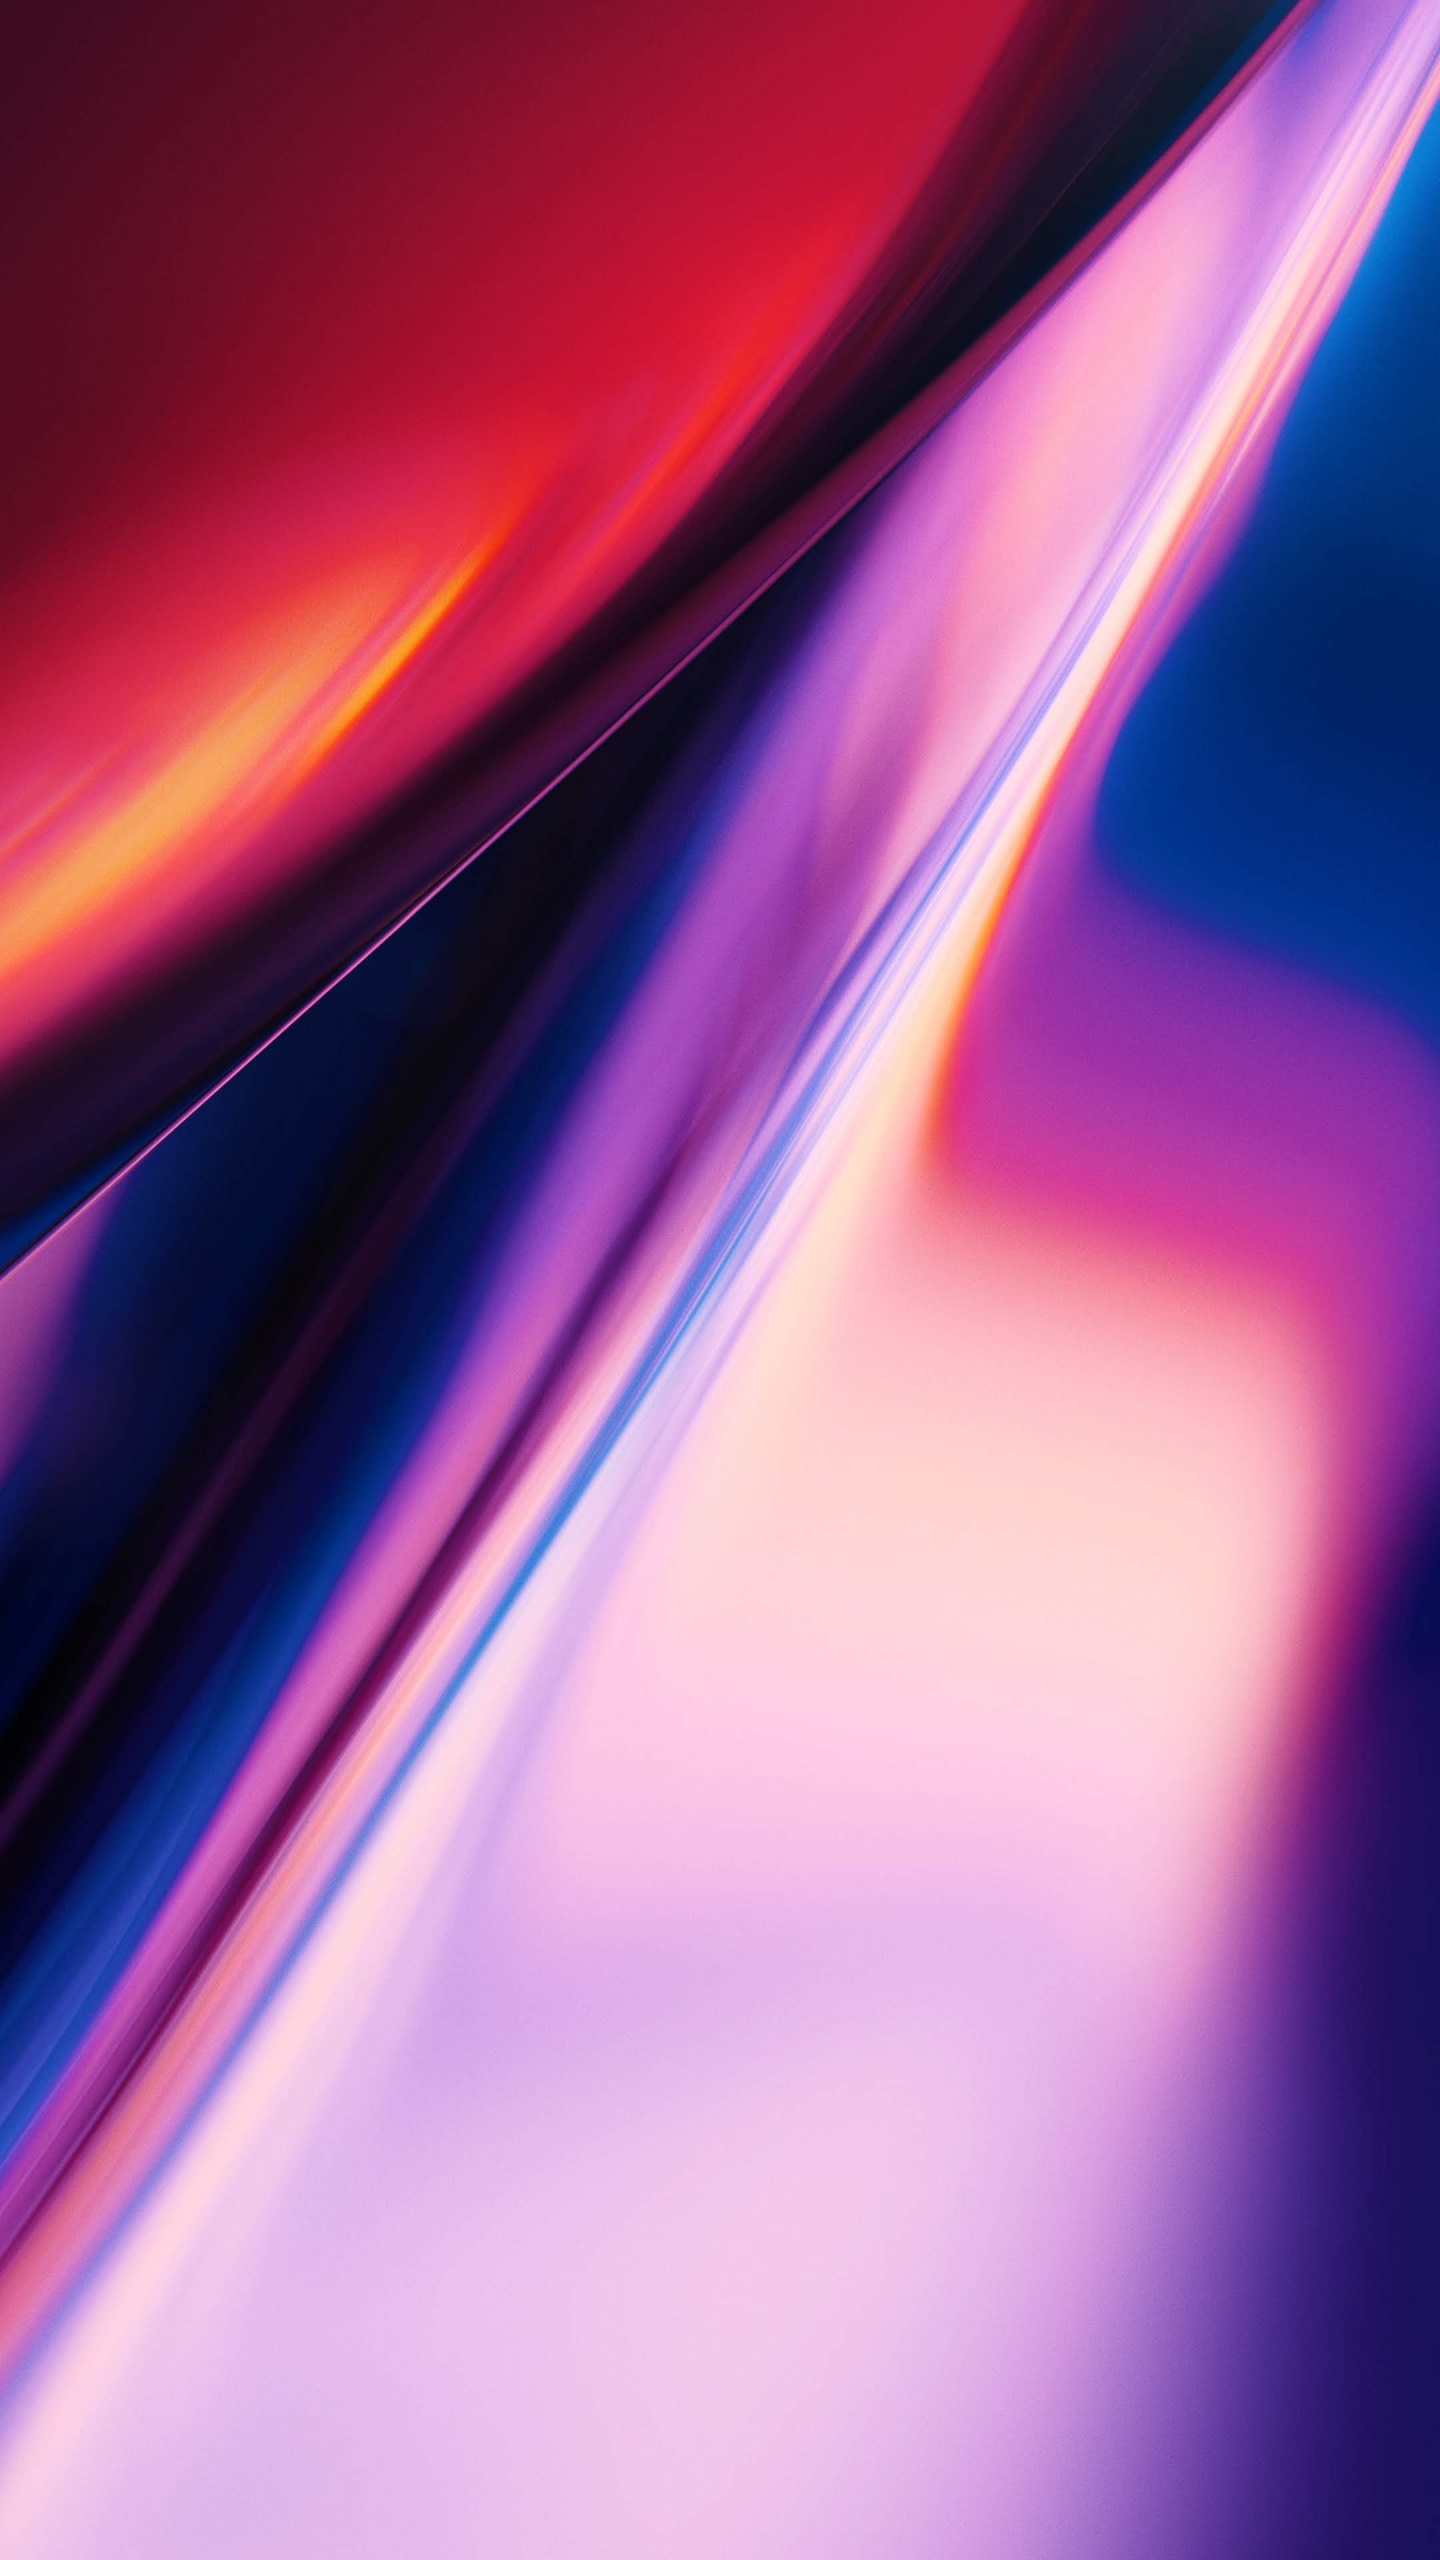 OnePlus 7 Pro, Oneplus 7t, Oneplus 8, Android, Colorfulness. Wallpaper in 1440x2560 Resolution